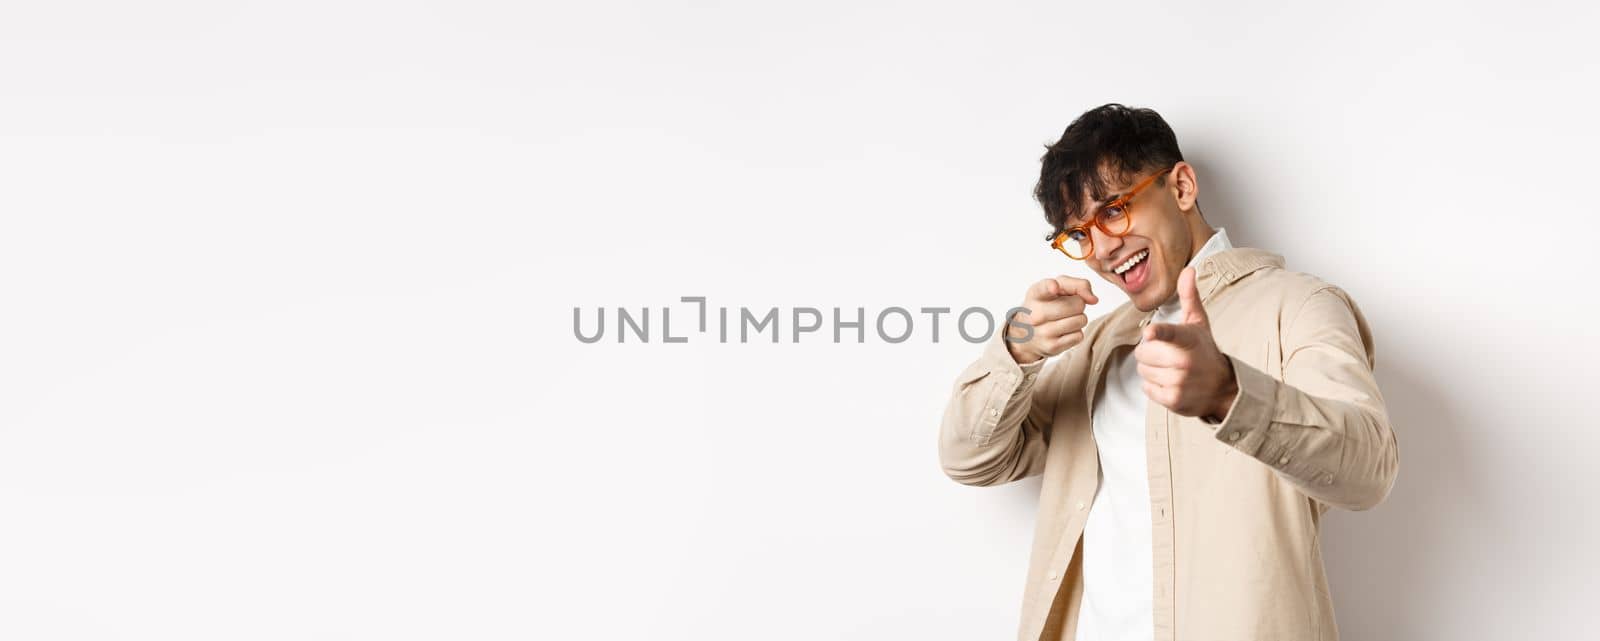 Handsome funny man in glasses smiling, pointing fingers at camera, choosing or inviting you, standing on white background.